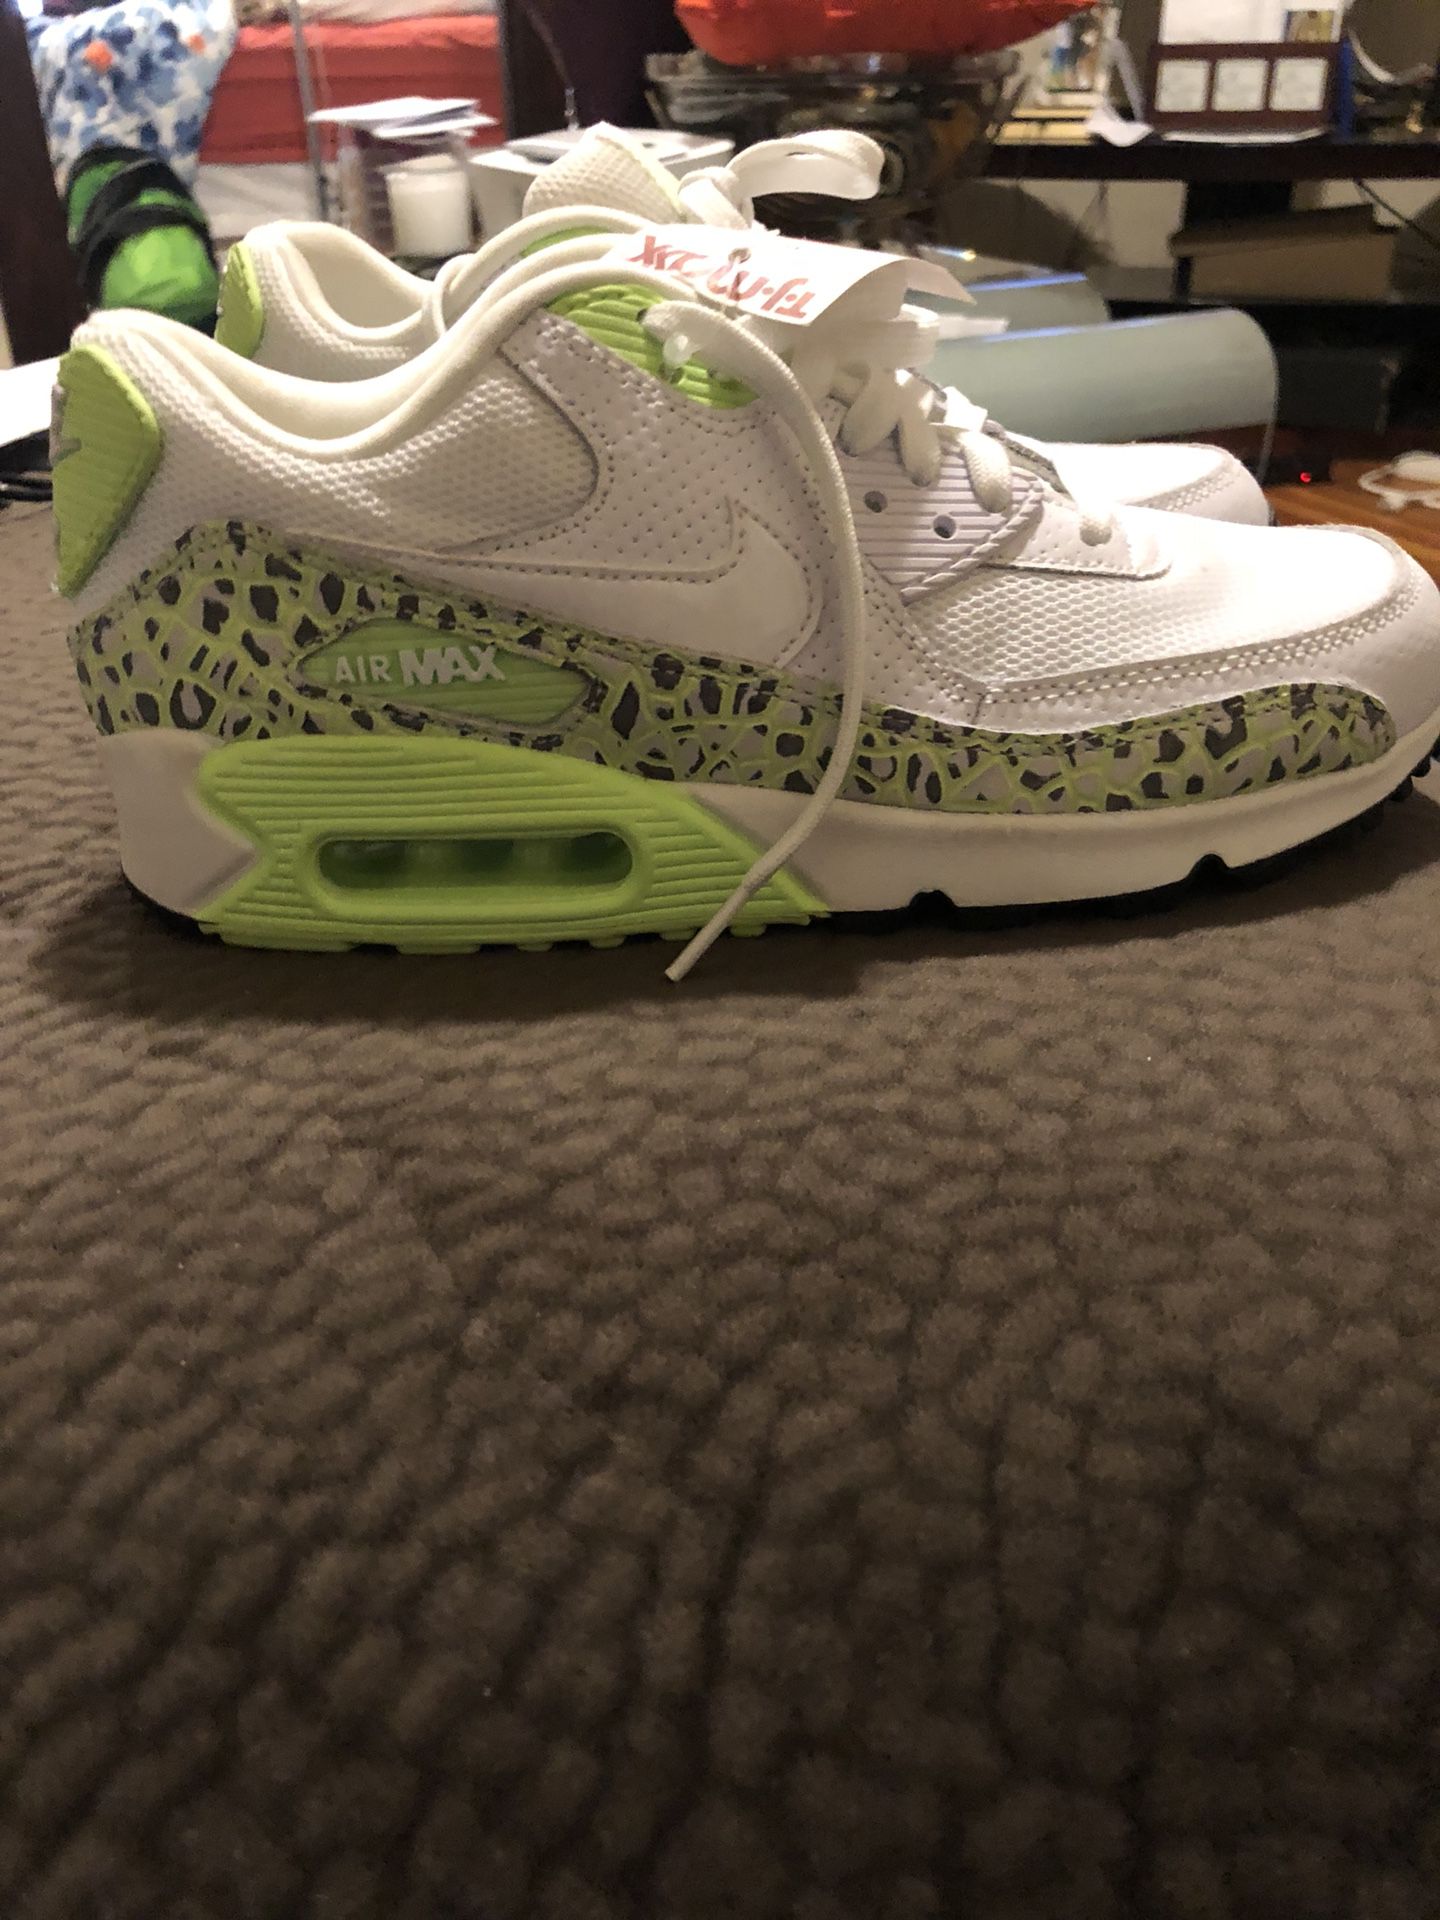 Brand New Nike Air Max 90 size 7